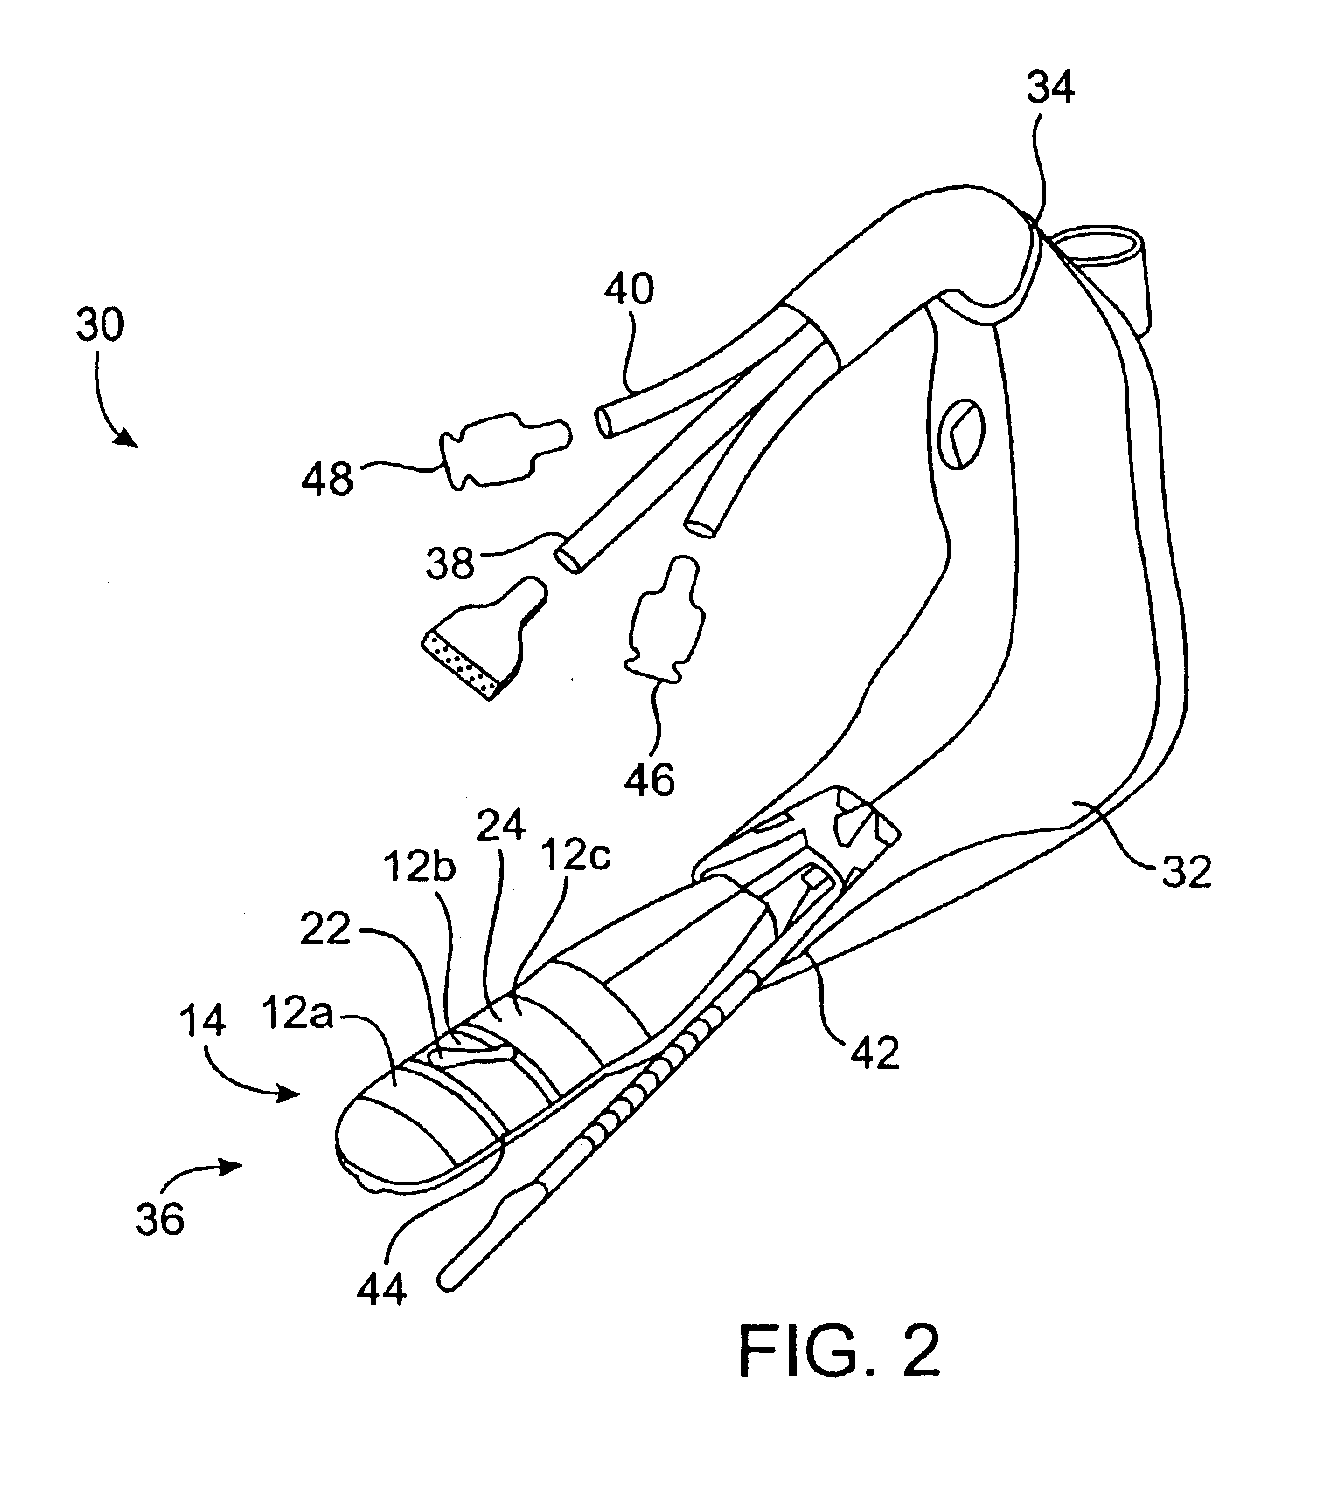 Needle deployment for temperature sensing from an electrode